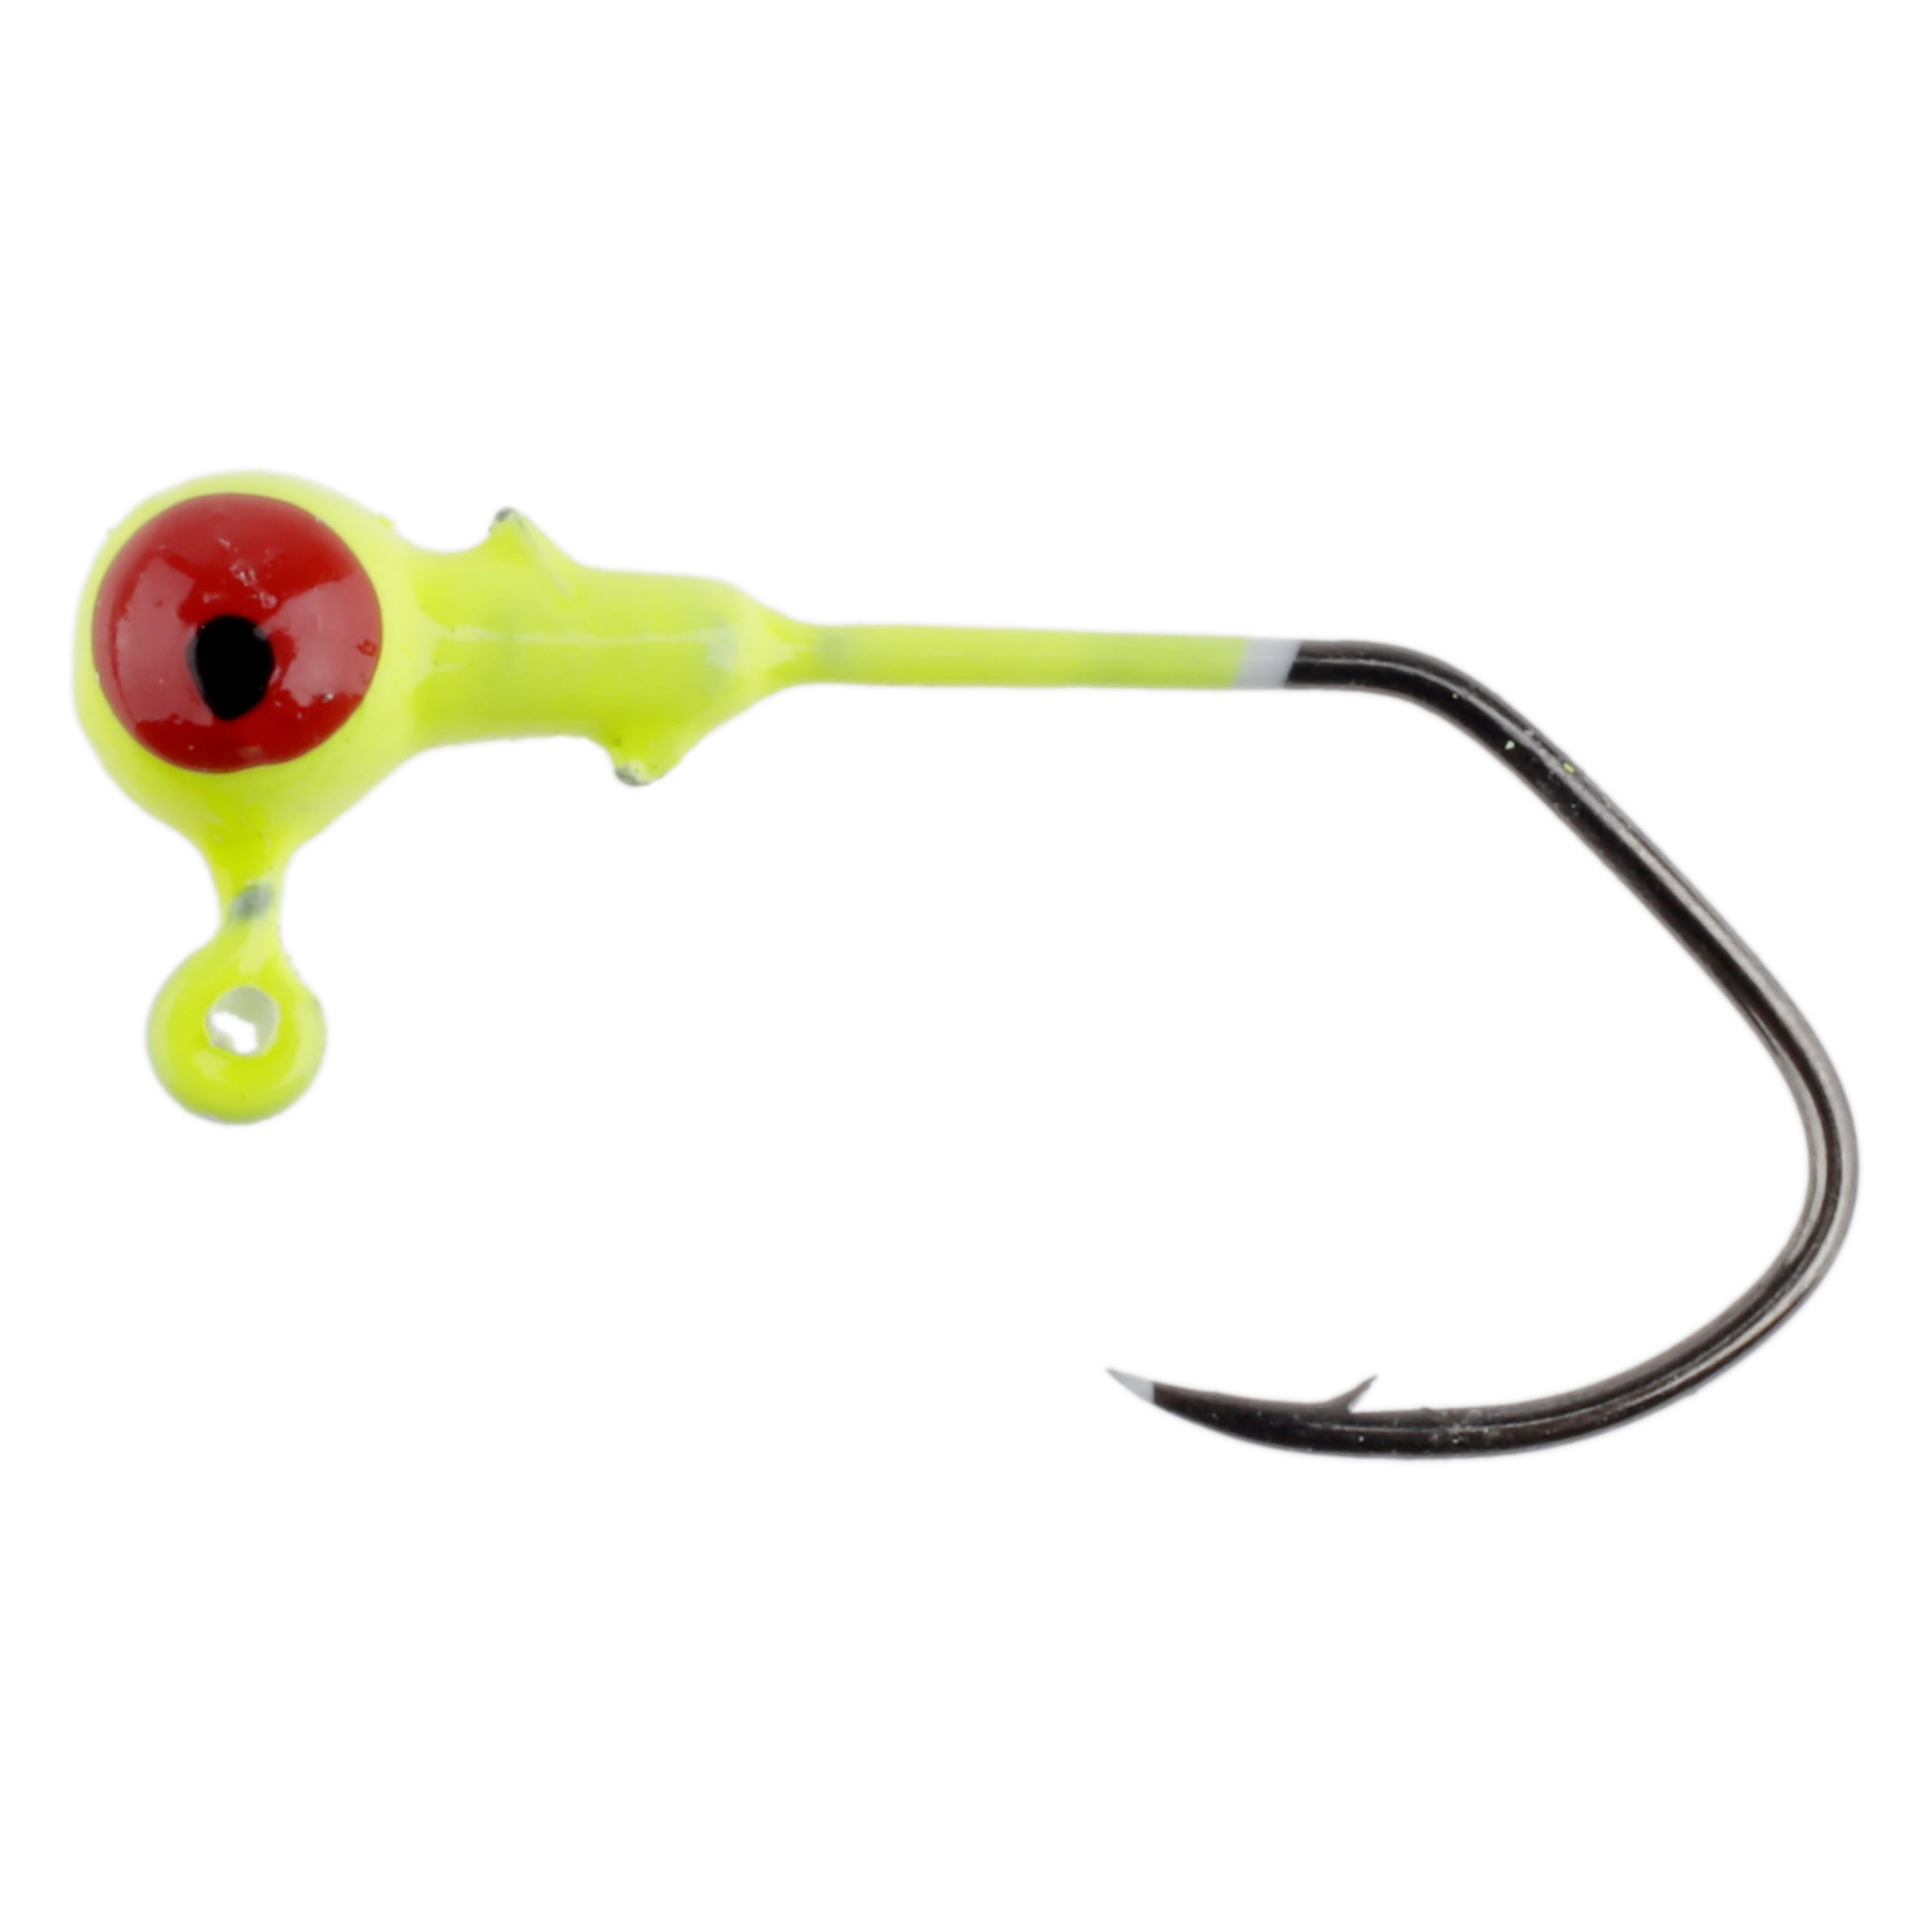 Arkie Lure Pro Model Jig Heads with Sickle Hook, Chartreuse, 1/32